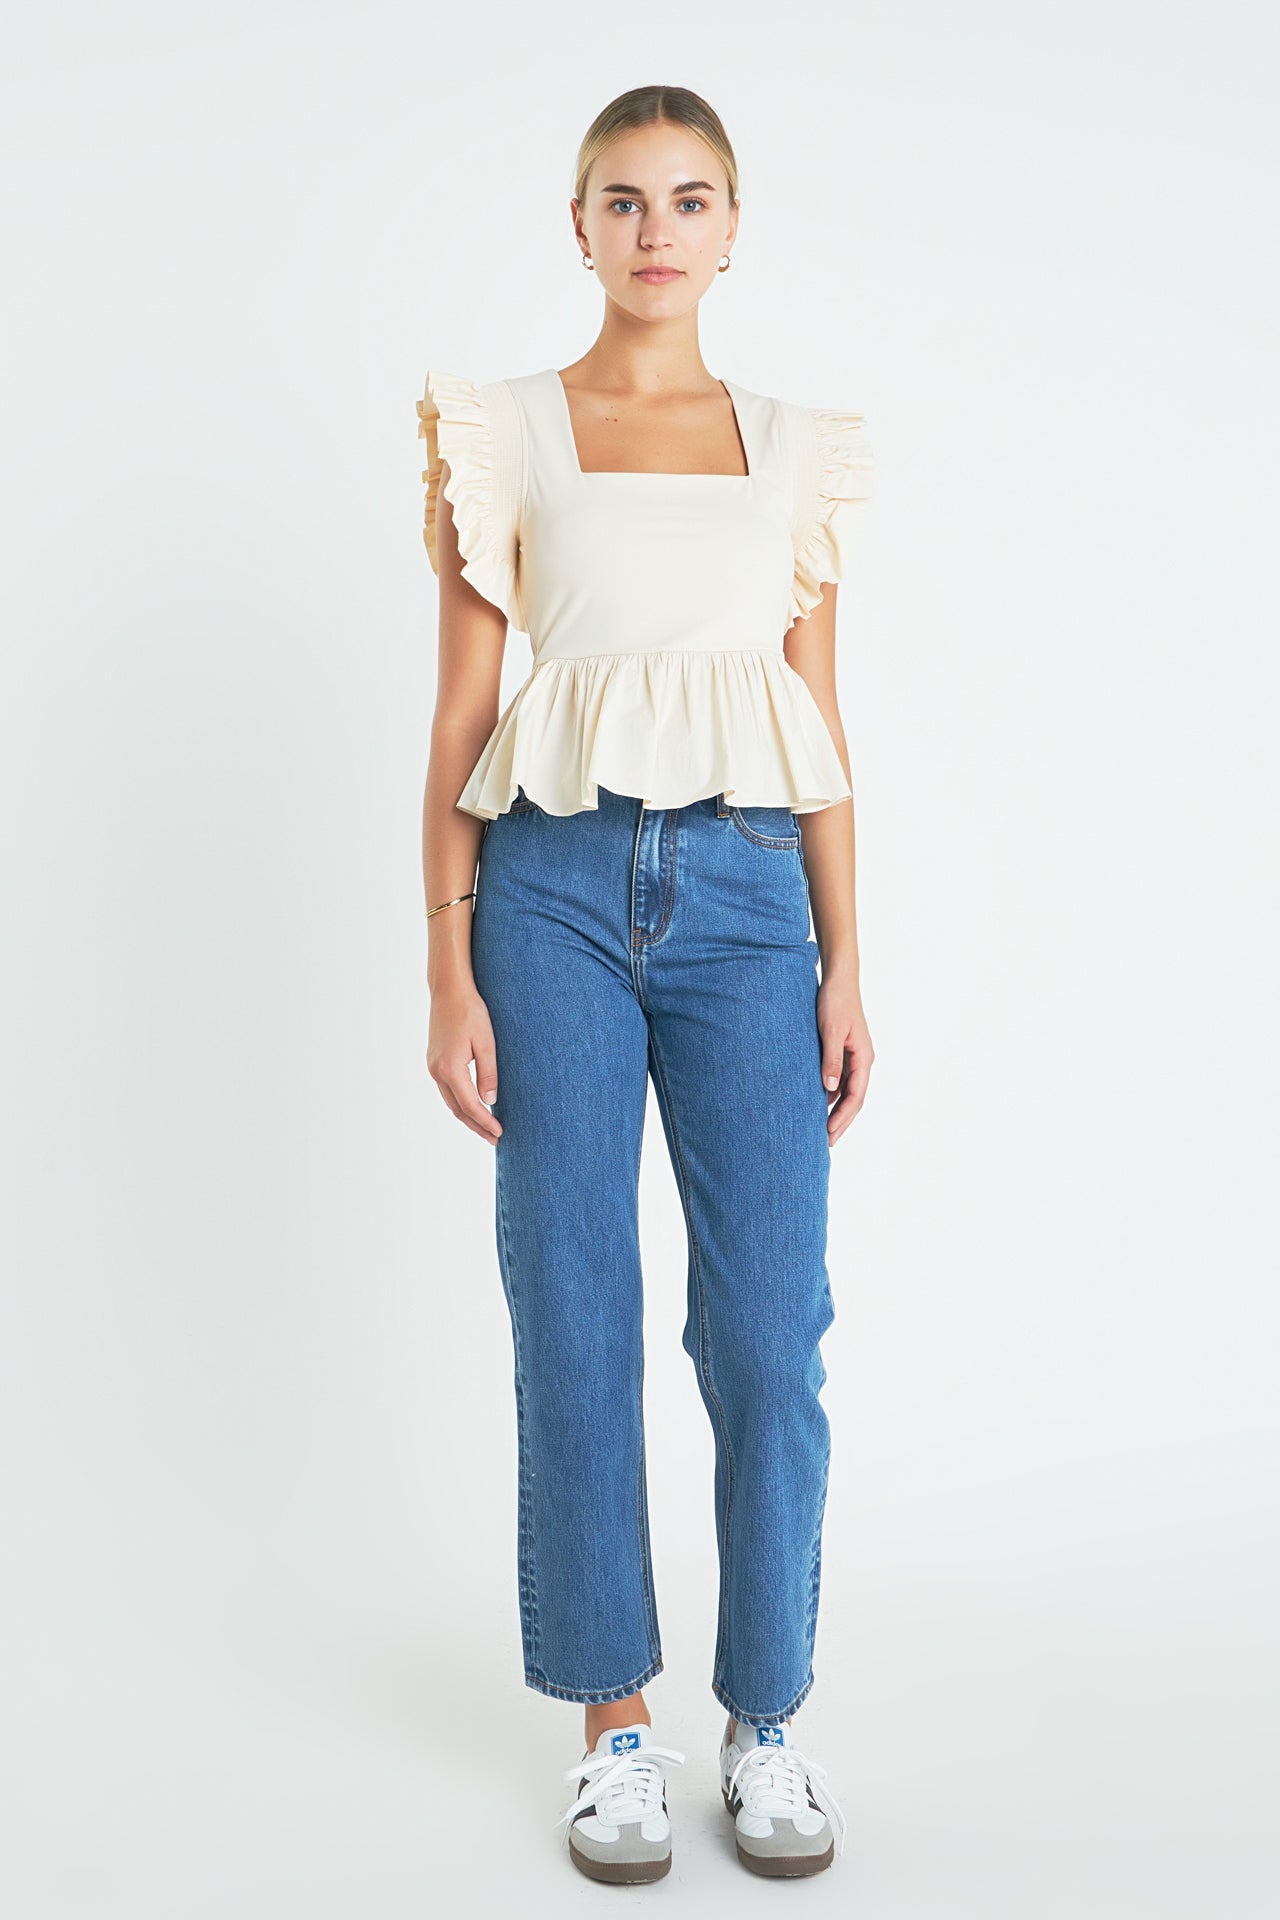 ENGLISH FACTORY - Square Neckline Ruffled Top - TOPS available at Objectrare